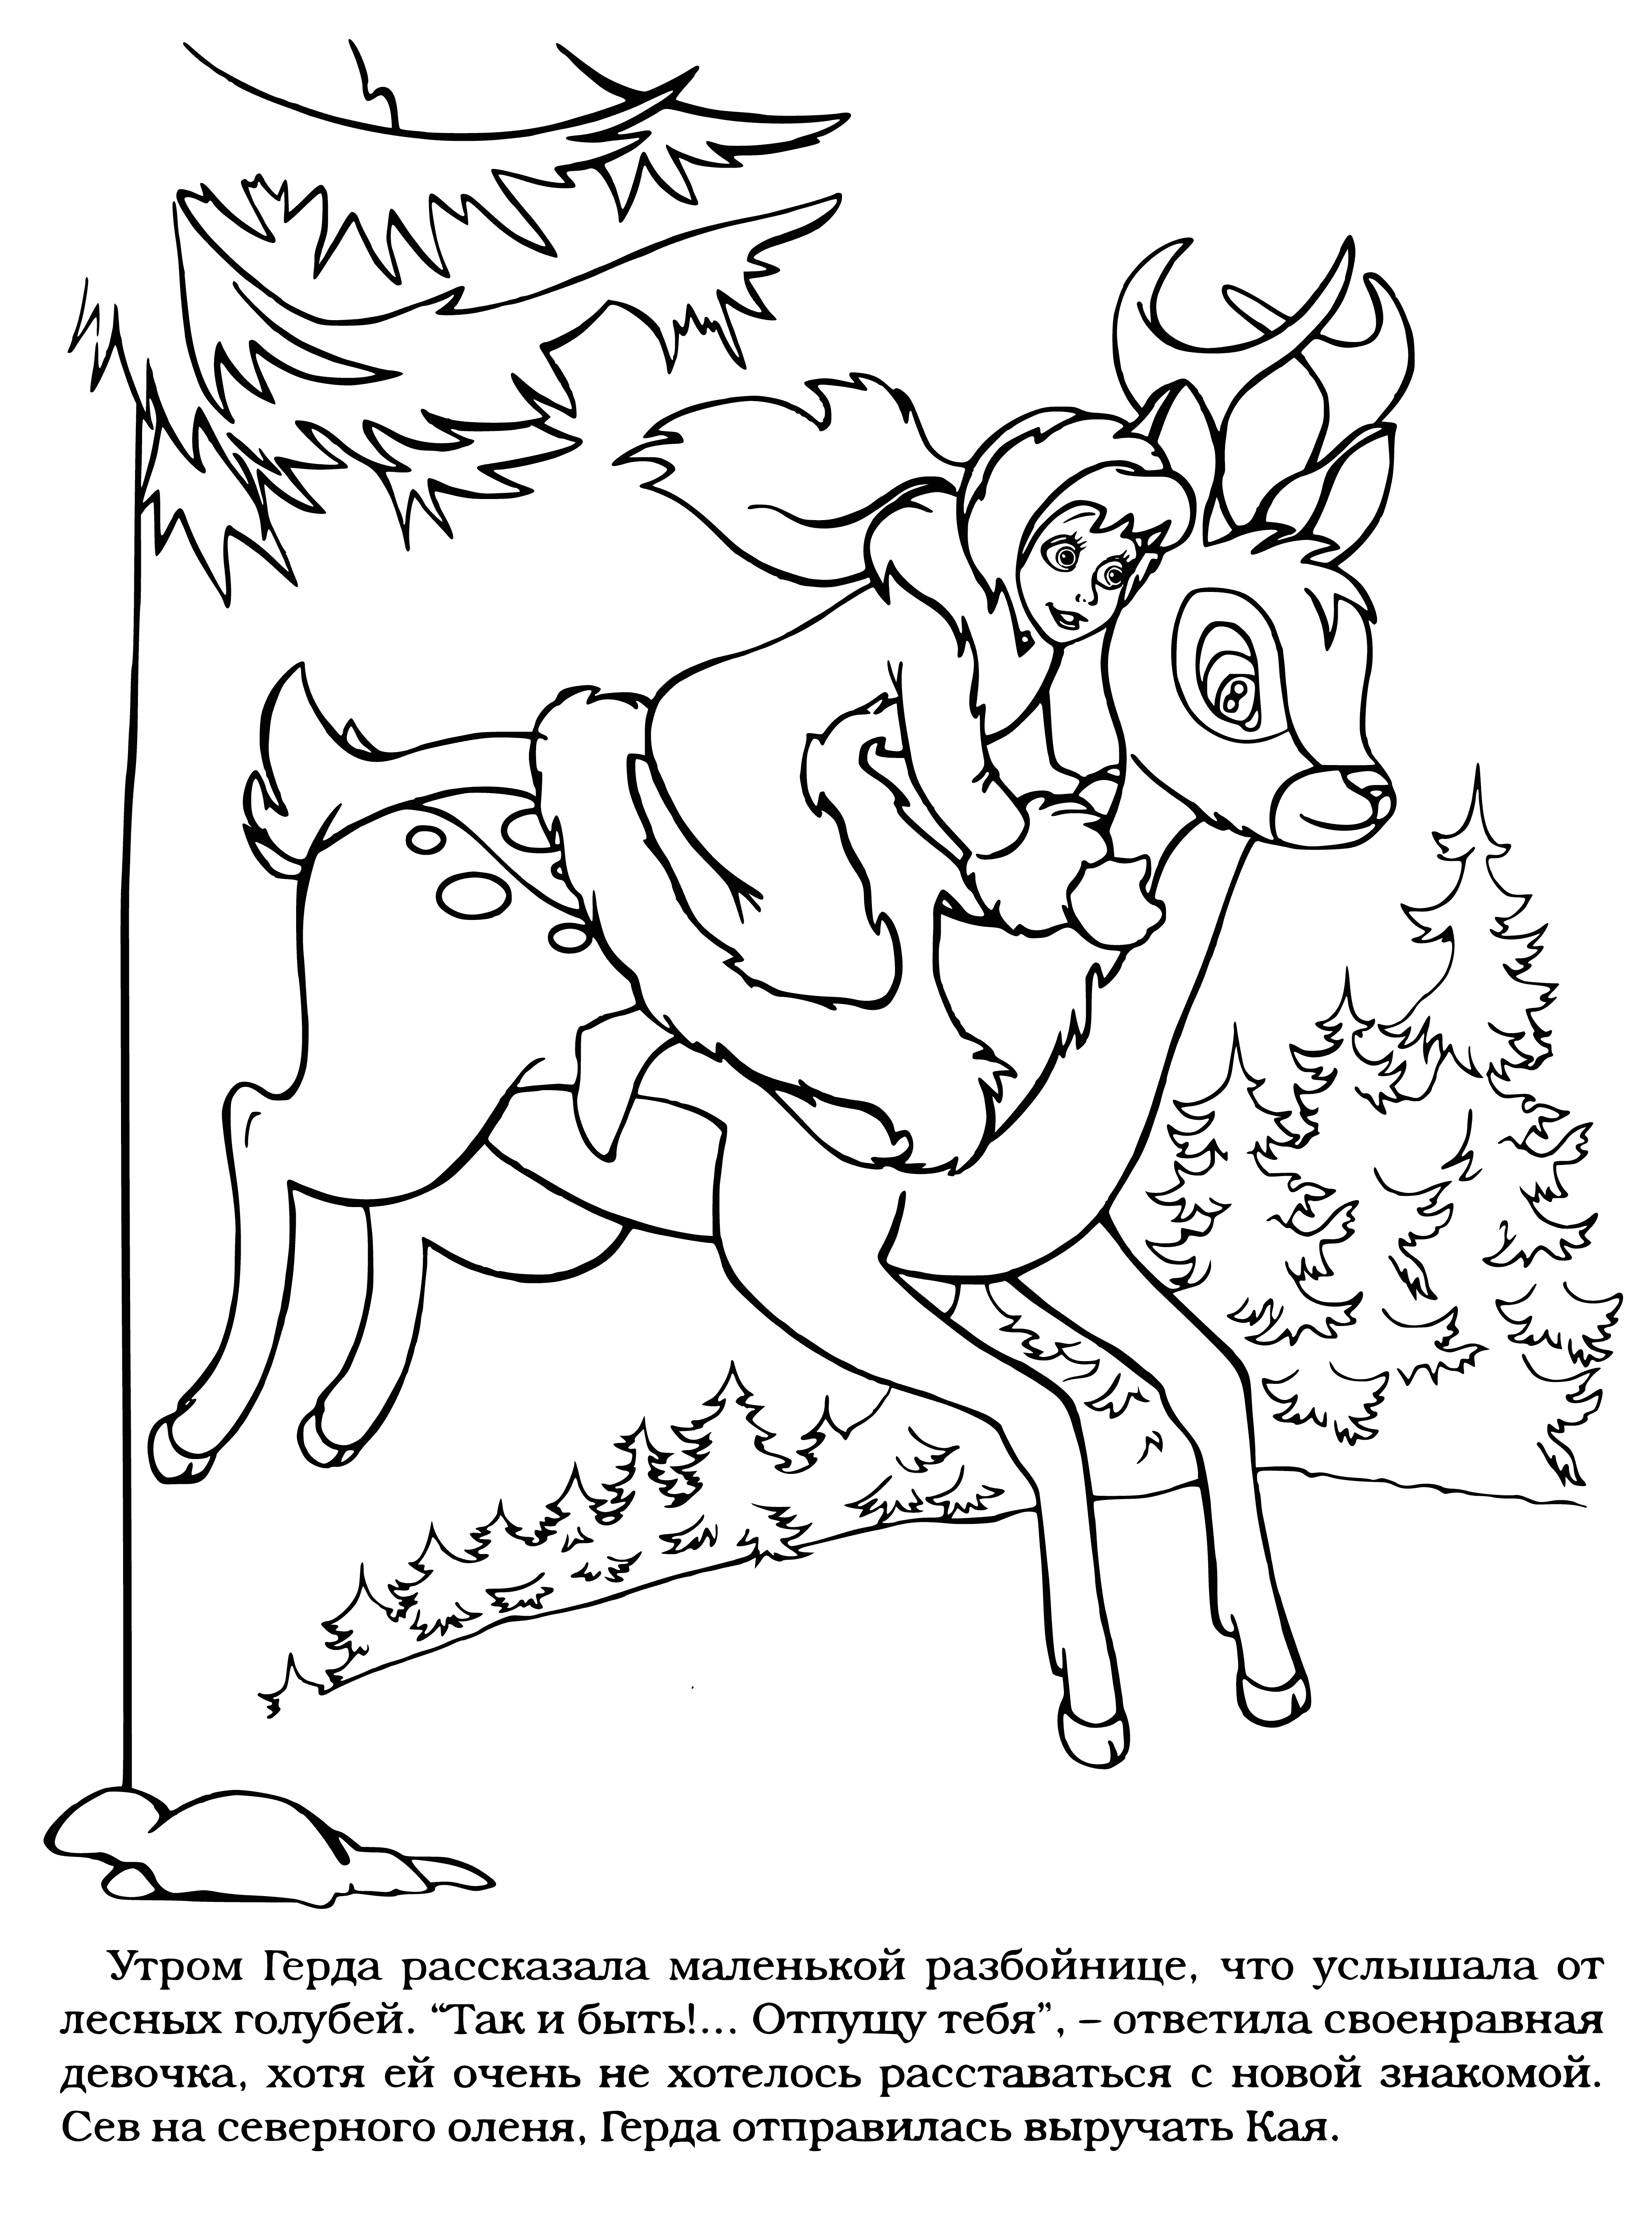 coloring page: A smiling Gerda stands amongst bees, butterflies and a field of flowers.